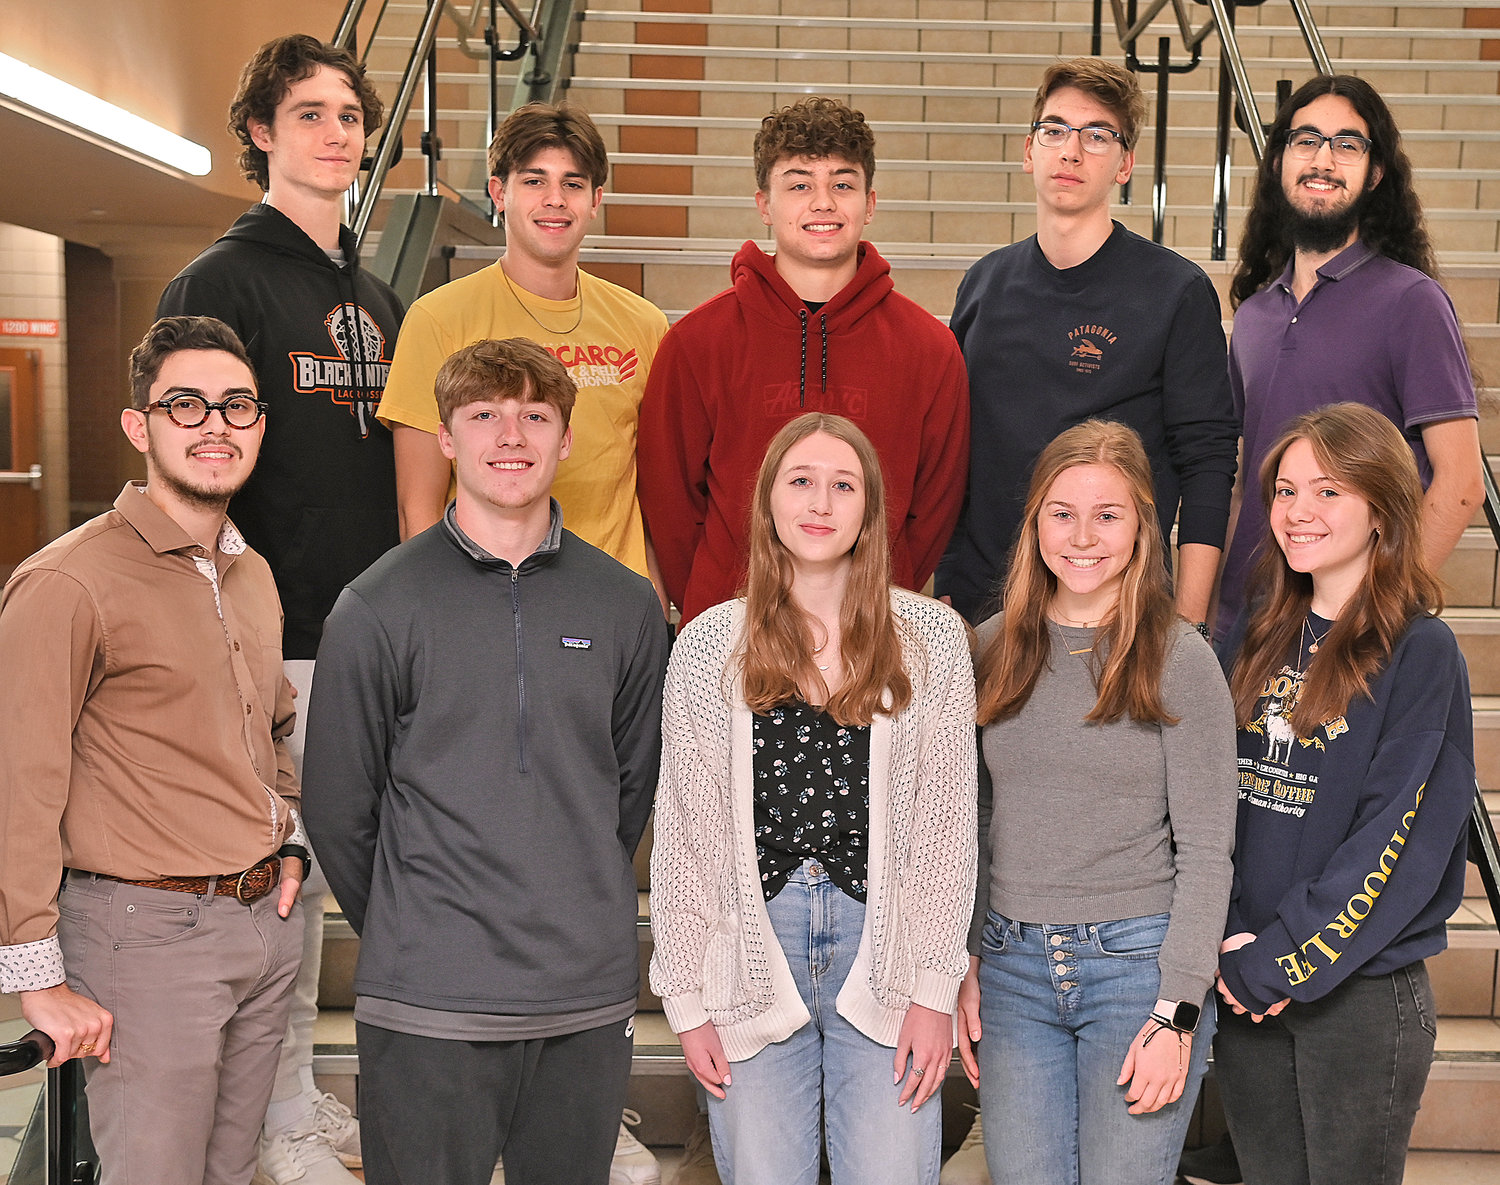 Members of the Top 10 in Rome Free Academy’s Class of 2023 pause for a group photo before heading off to class on Wednesday, March 2. From left, front row:  Kenneth Davis, Jacob Premo, Katelyn Boyer, Kaitlyn Jones and Haylie Pedersen; back row: Brent Viviani, Collin Gannon, Collin Mummert, Dennis Van Hoesel and Enrique Rivera.